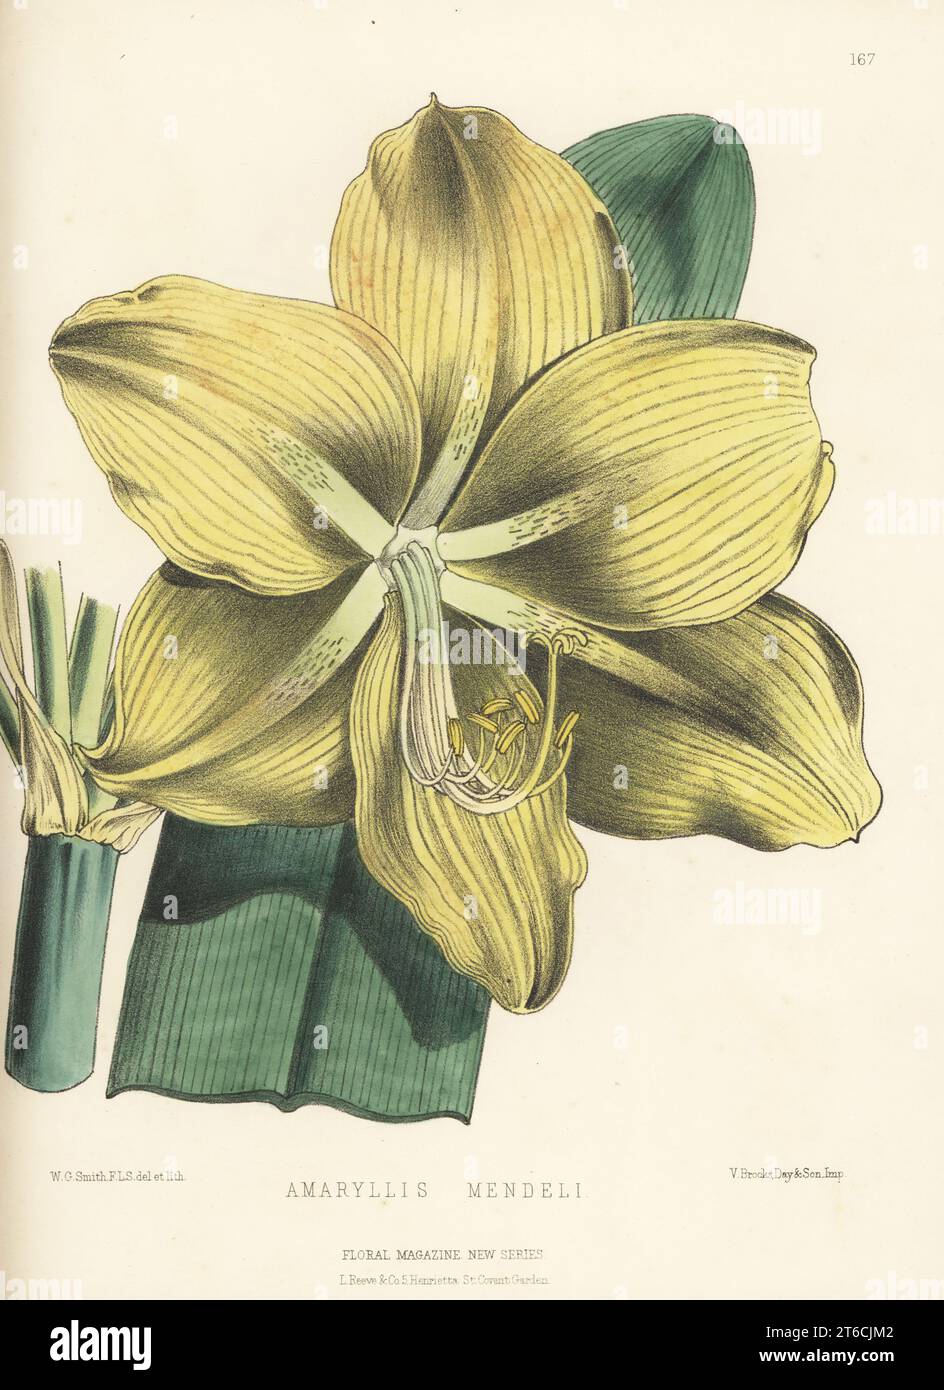 Amaryllis mendelii, raised by Bernard Samuel Williams of Victoria and Paradise Nurseries, Upper Holloway. As Amaryllis mendeli. Handcolored botanical illustration drawn and lithographed by Worthington George Smith from Henry Honywood Dombrain's Floral Magazine, New Series, Volume 4, L. Reeve, London, 1875. Lithograph printed by Vincent Brooks, Day & Son. Stock Photo